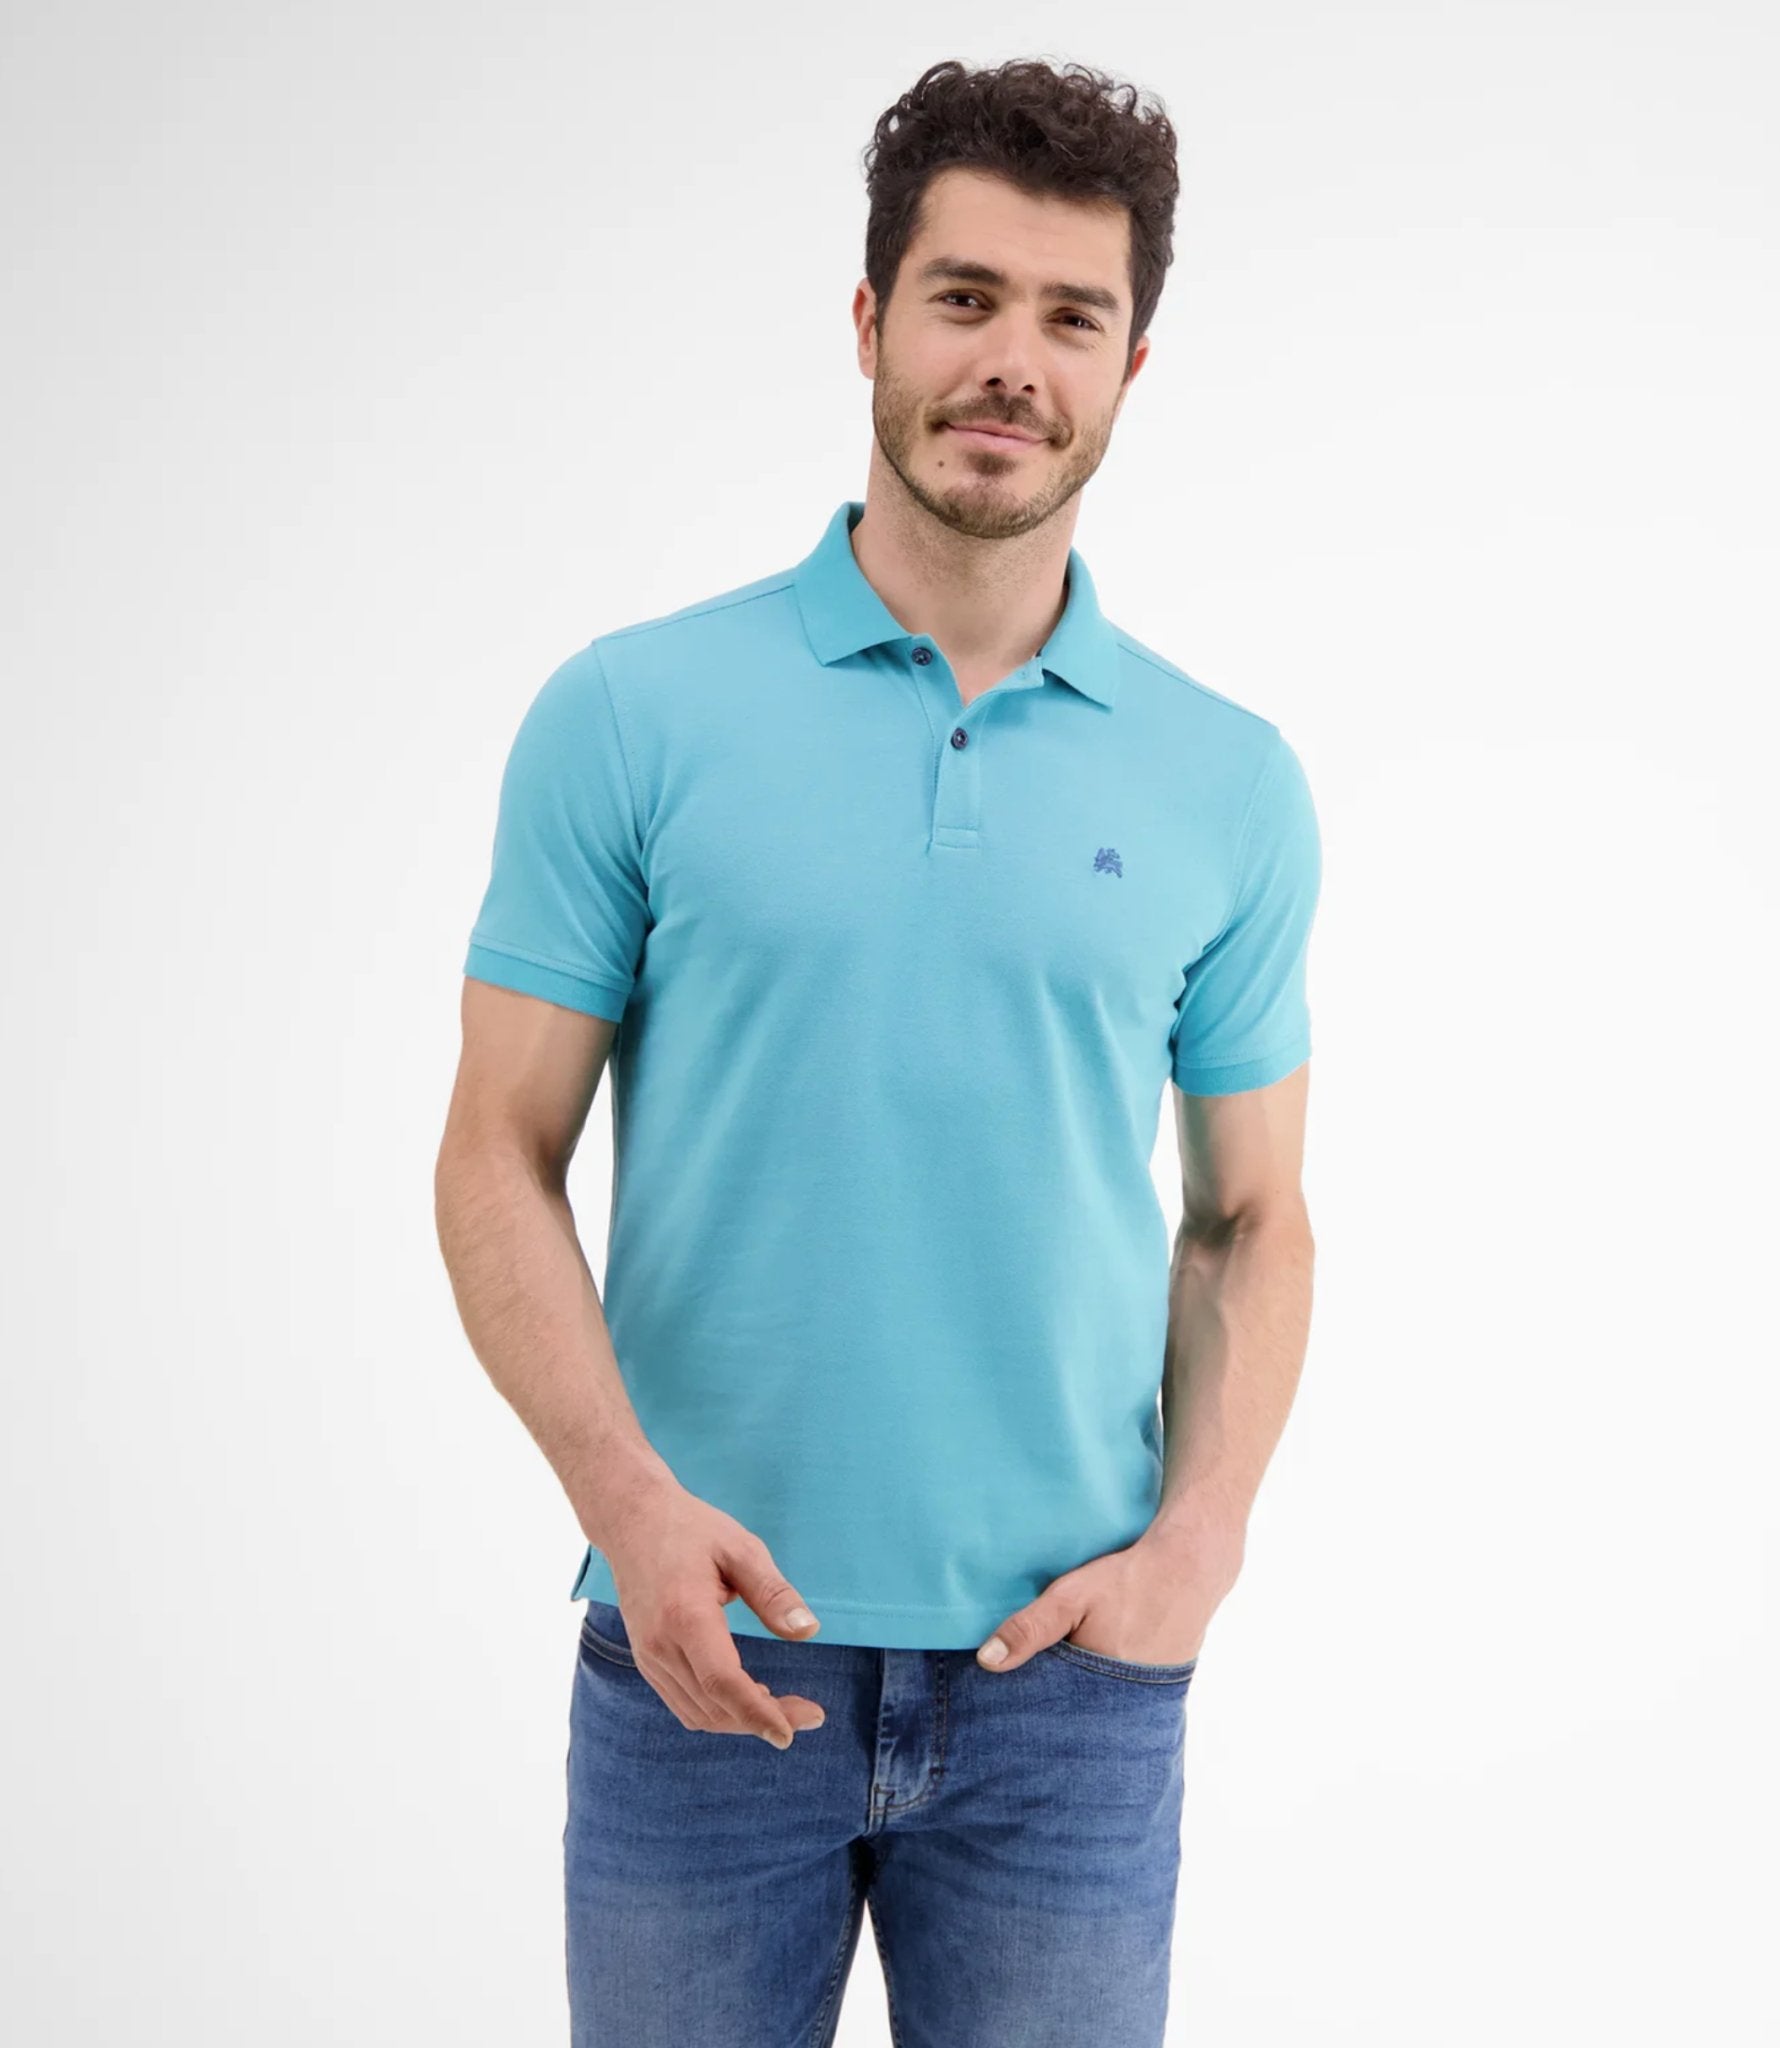 Turquoise Clothing High Polo-shirt – In GLS Light Cotton Pique Quality -